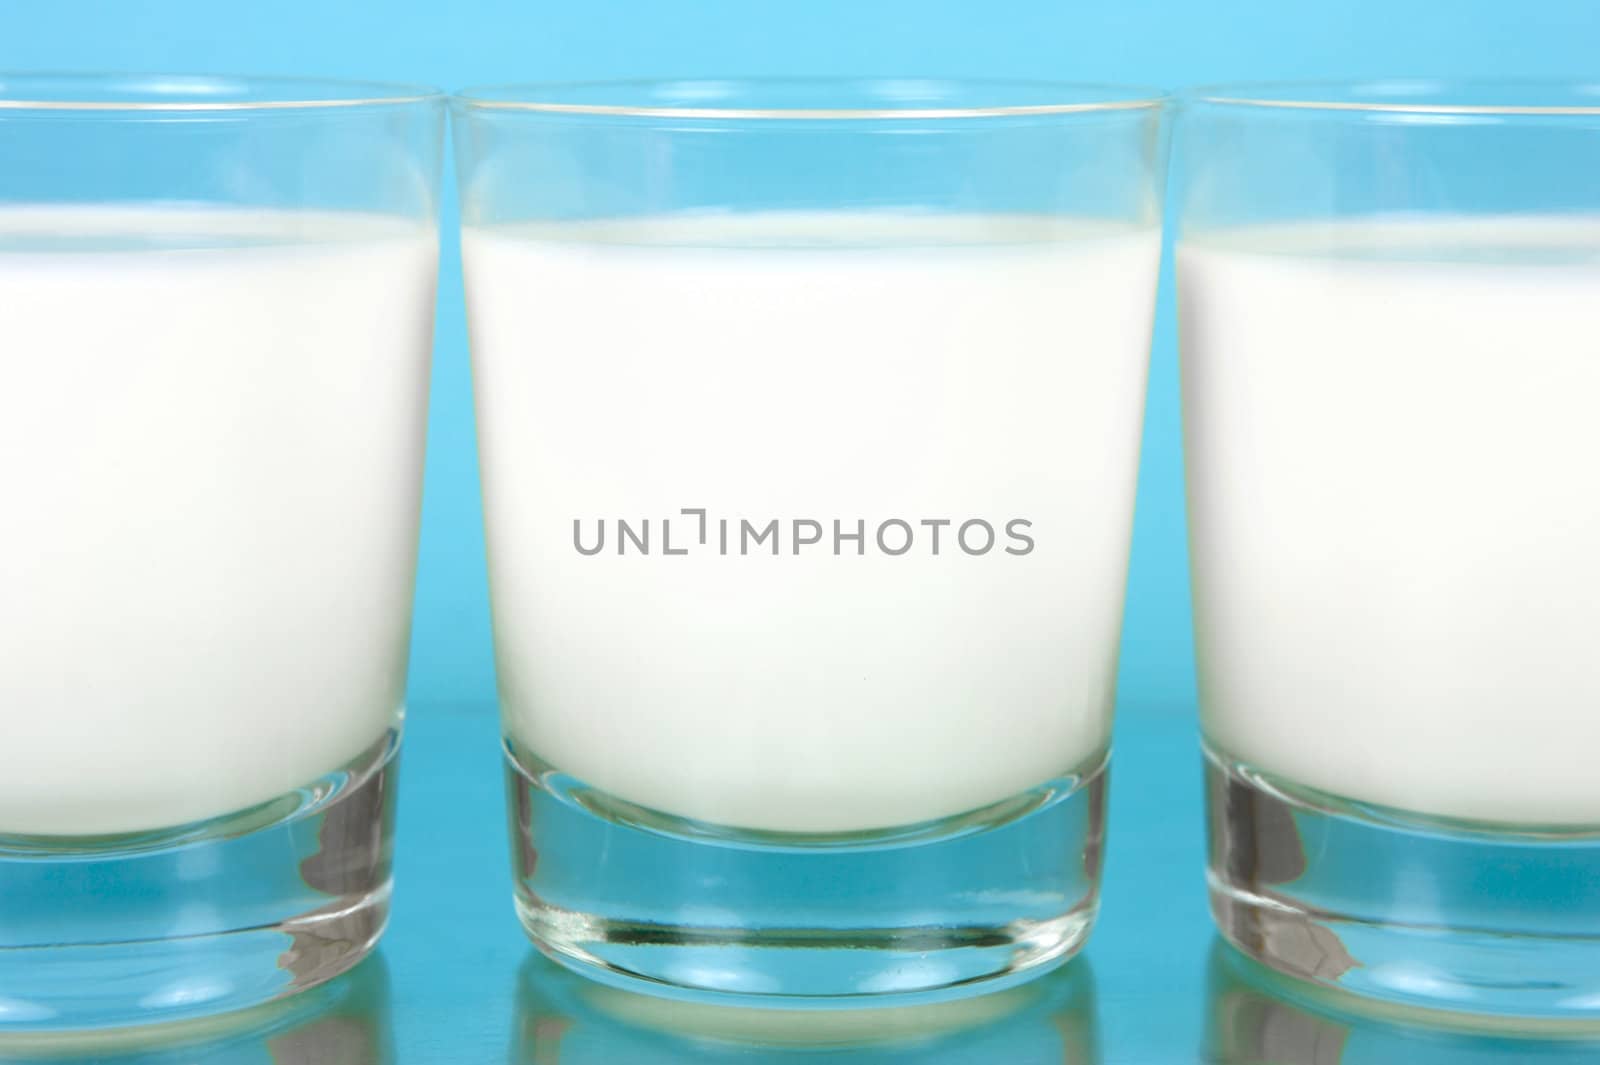 A glass of milk isolated against a blue background